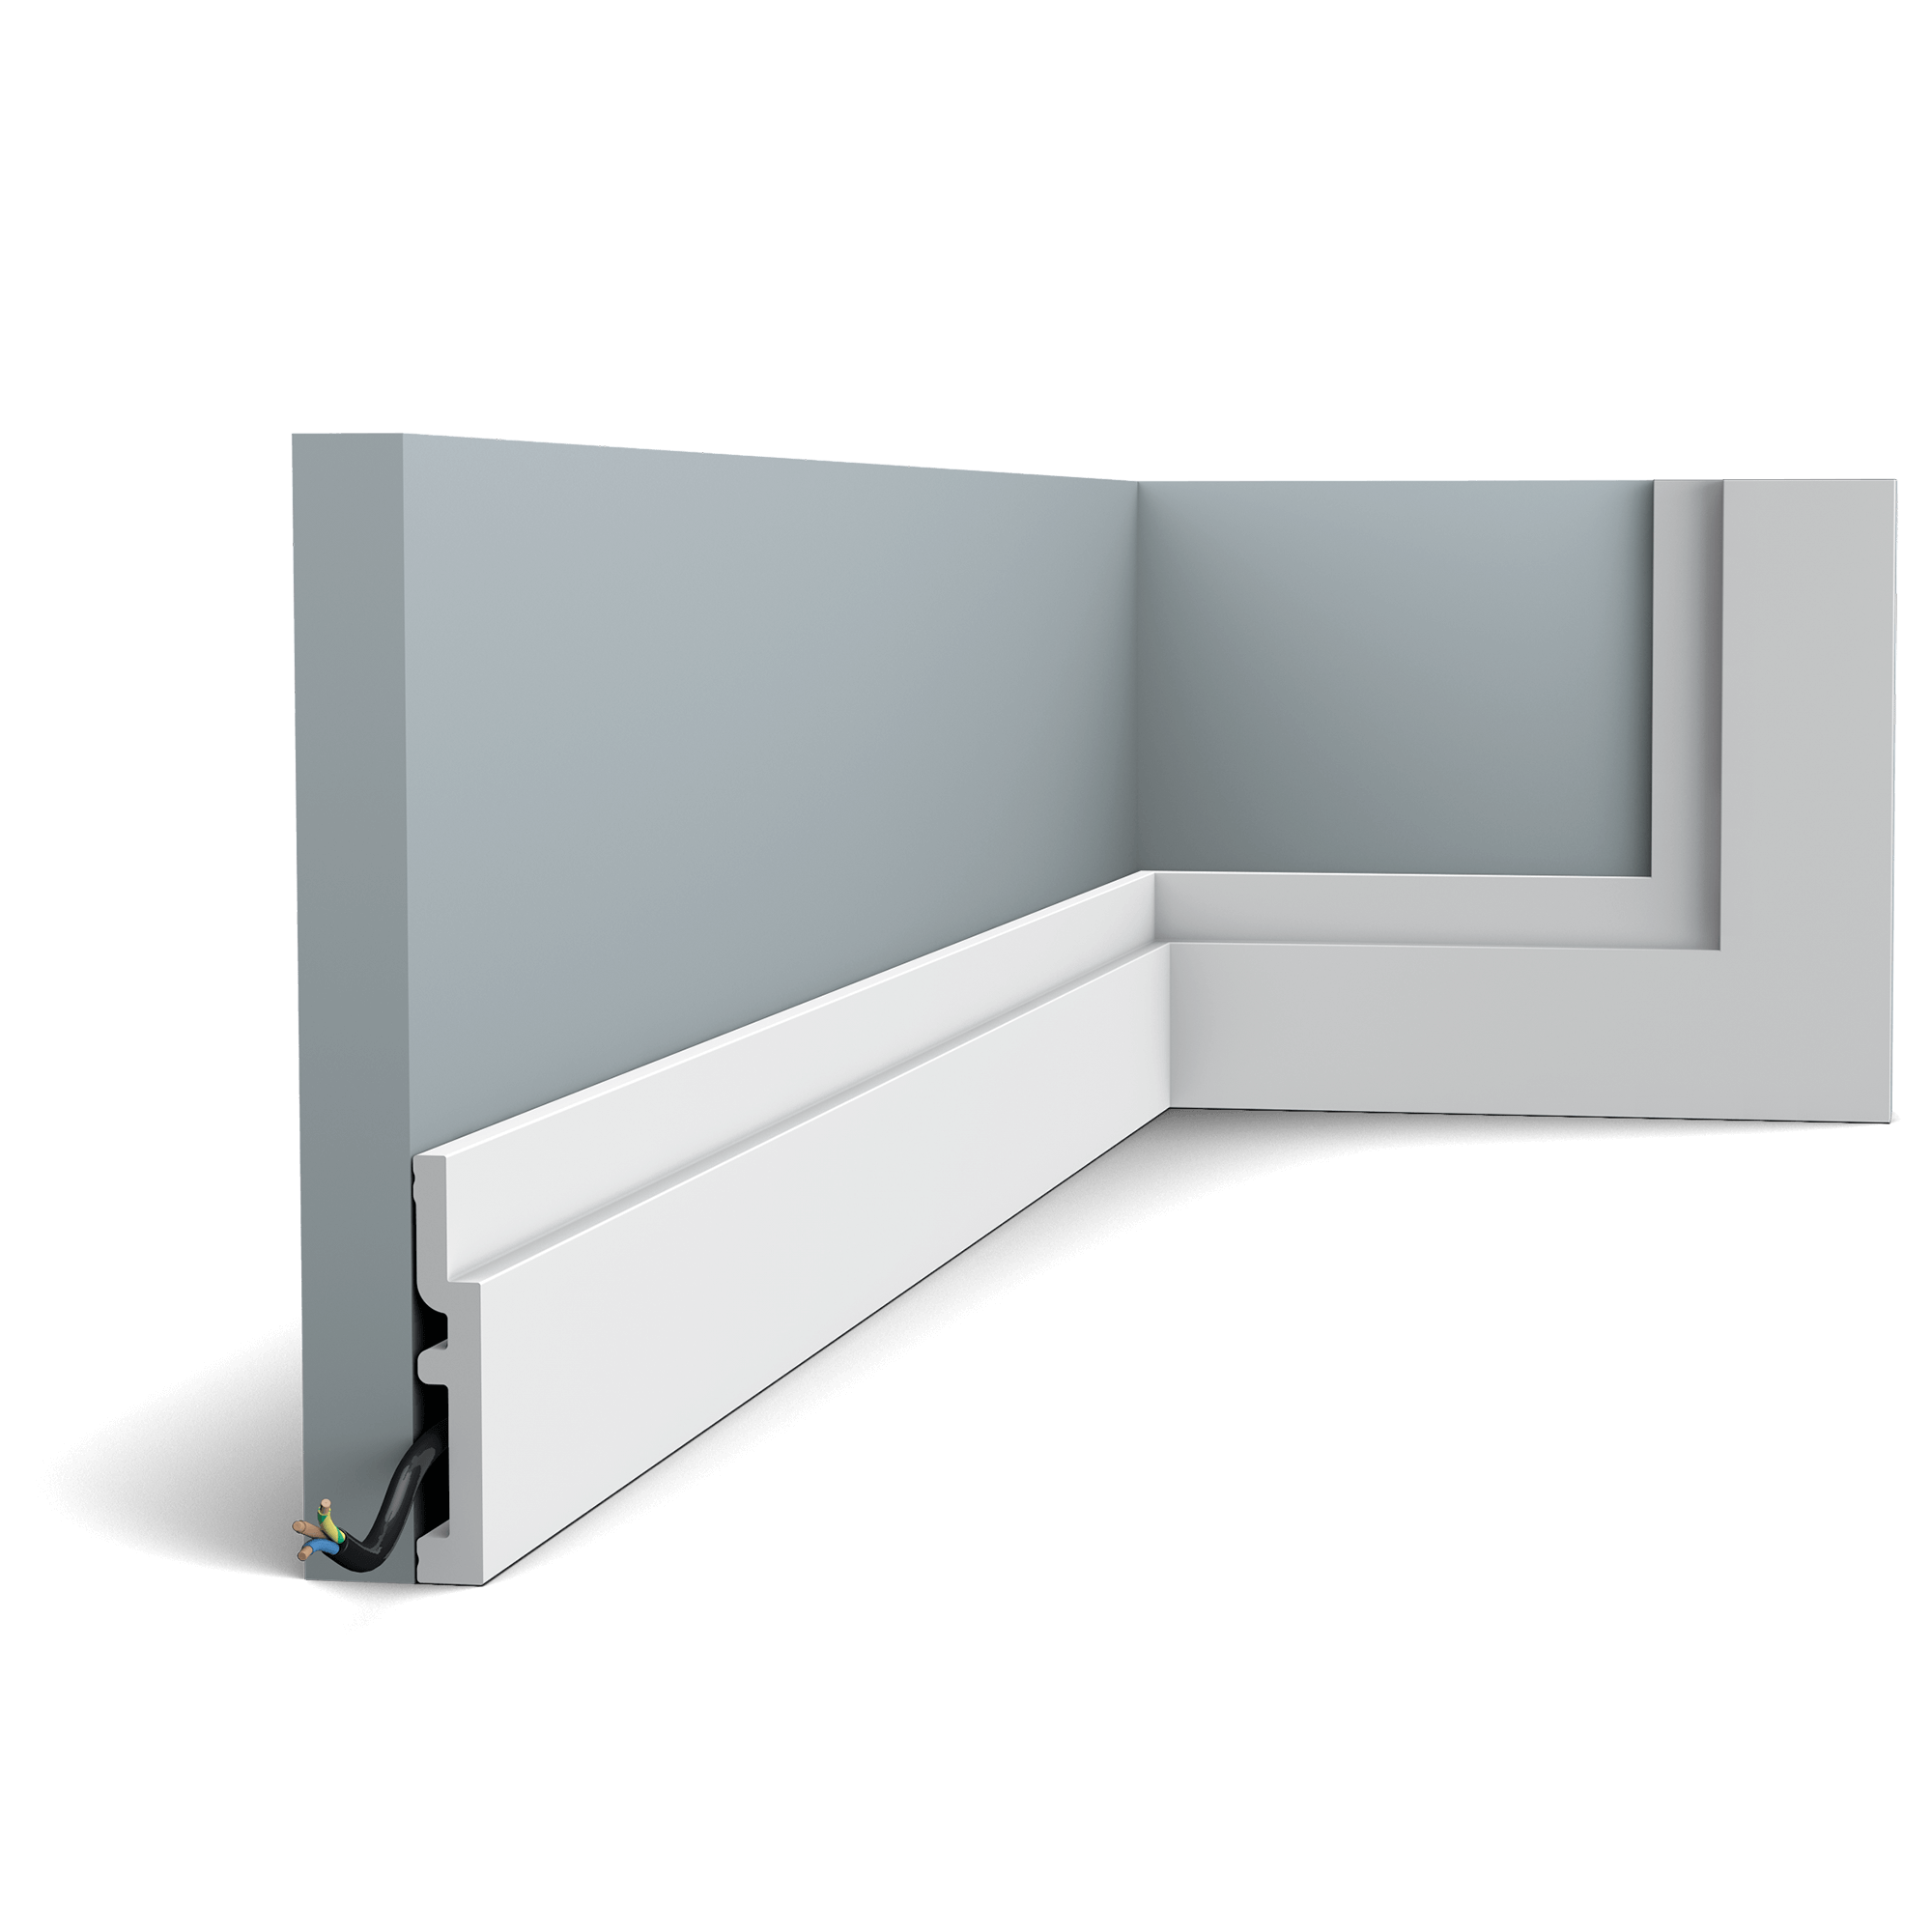 The pure shape and perfect proportions of this smallest High Line skirting board create an ideal transition between floor and wall. Whichever style of interior you have.